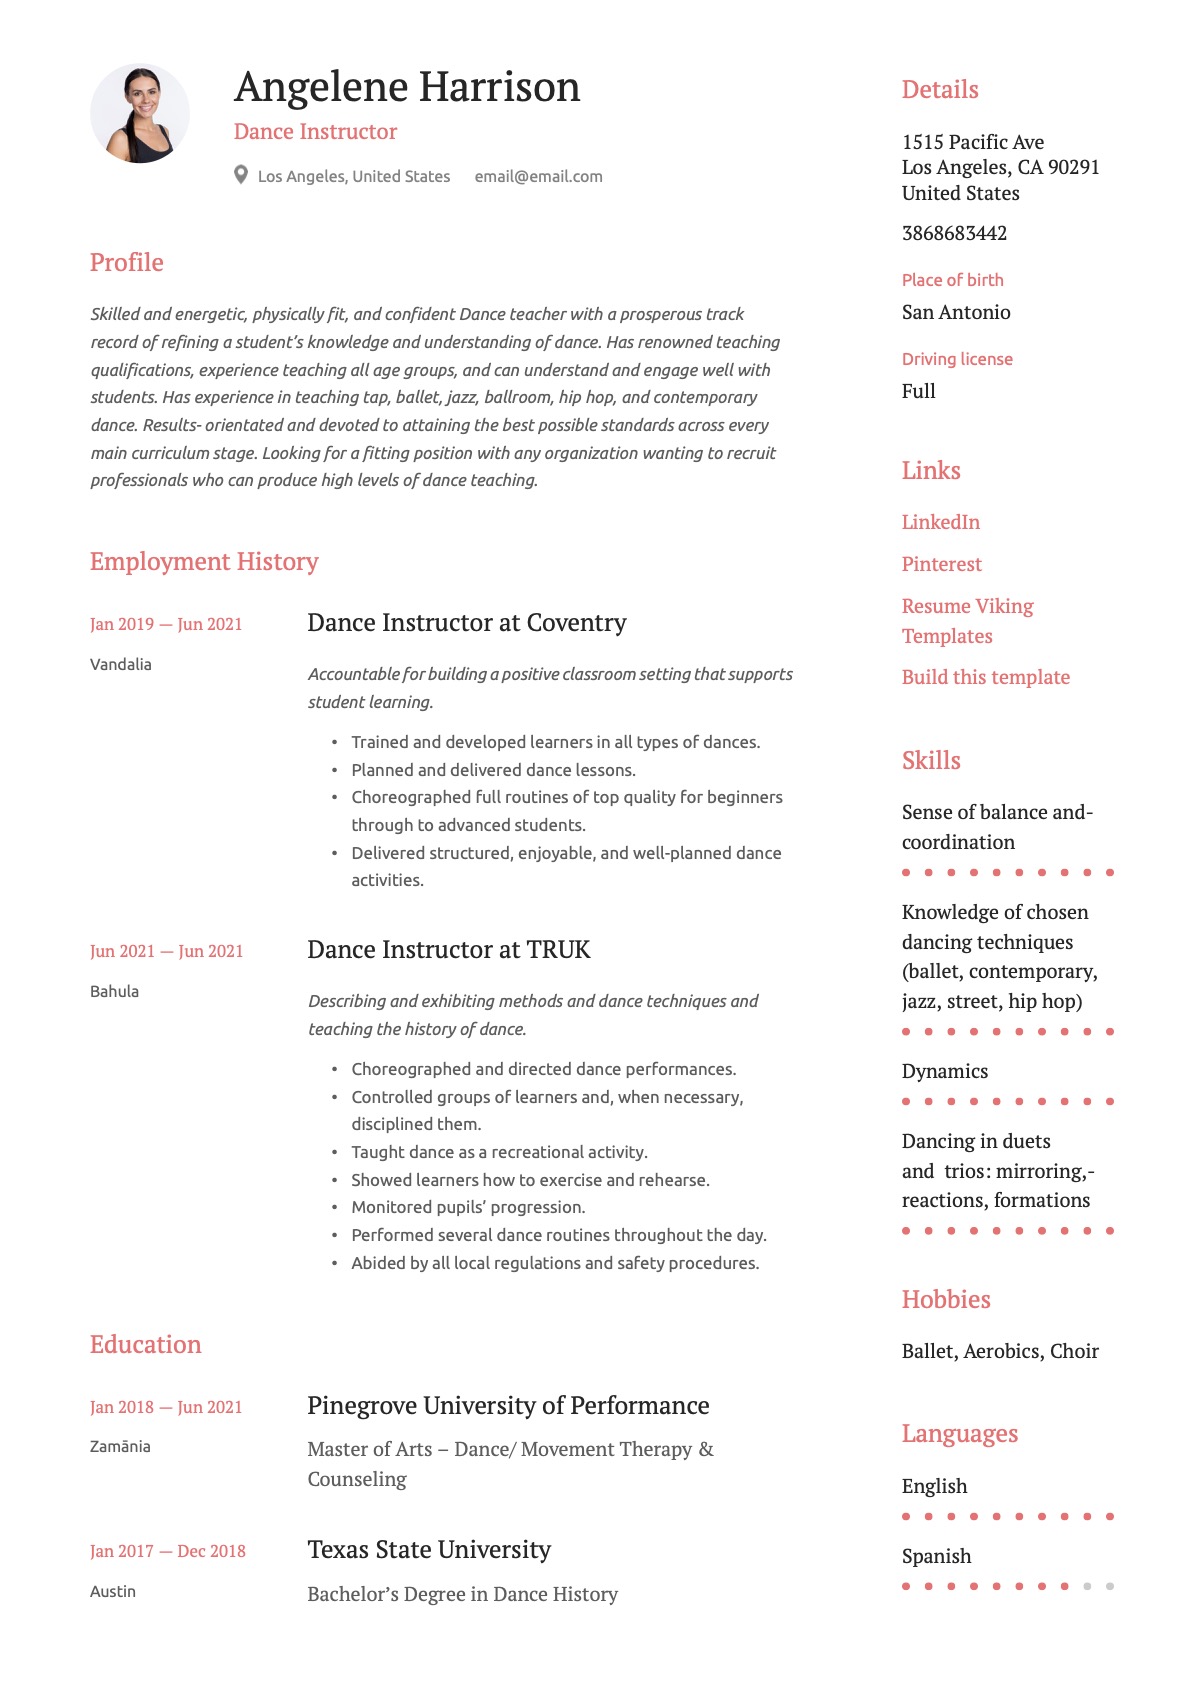 Dance Instructor Resume Example